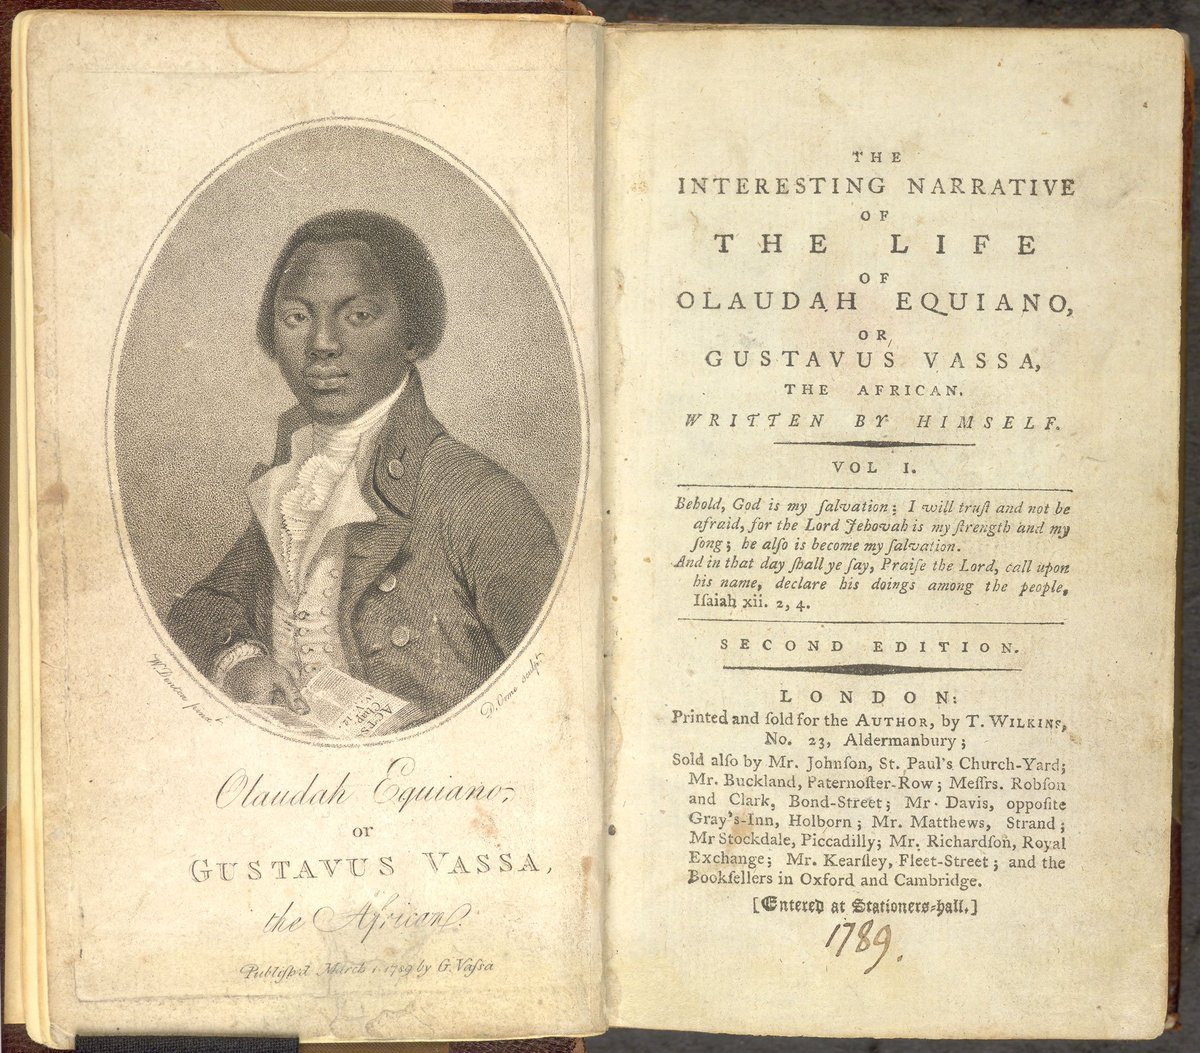 One of the most famous Black British figures is Olaudah Equiano and you can read his story in his own words. Kidnapped as a child, while enslaved he served in the navy, became a clerk and then trader in the West Indies and America and became a figure in the abolitionary movement.